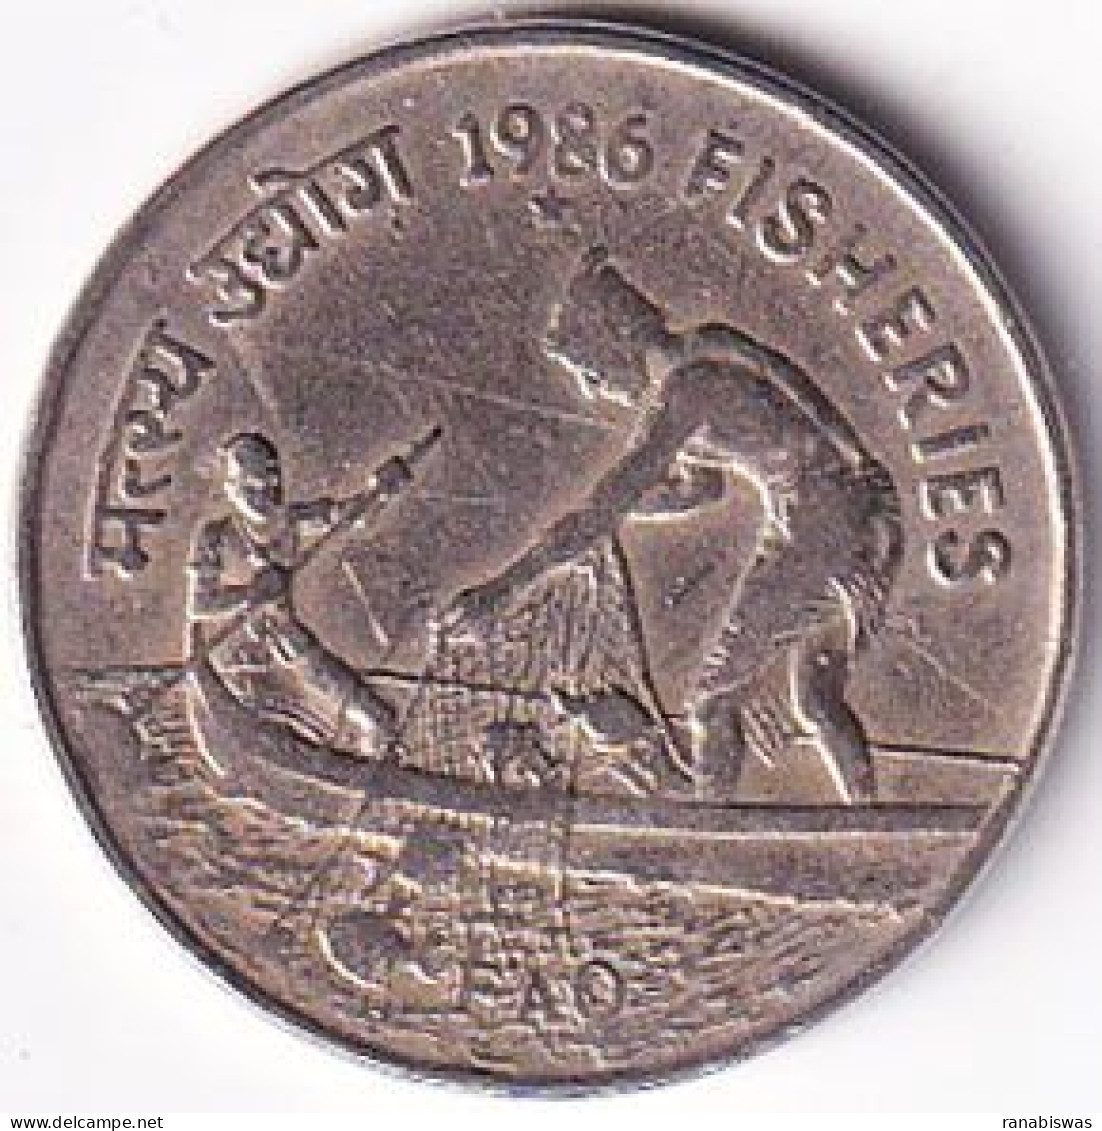 INDIA COIN LOT 27, 50 PAISE 1986, FISHERIES, FAO, HYDERABAD MINT, AUNC, SCARE - Inde